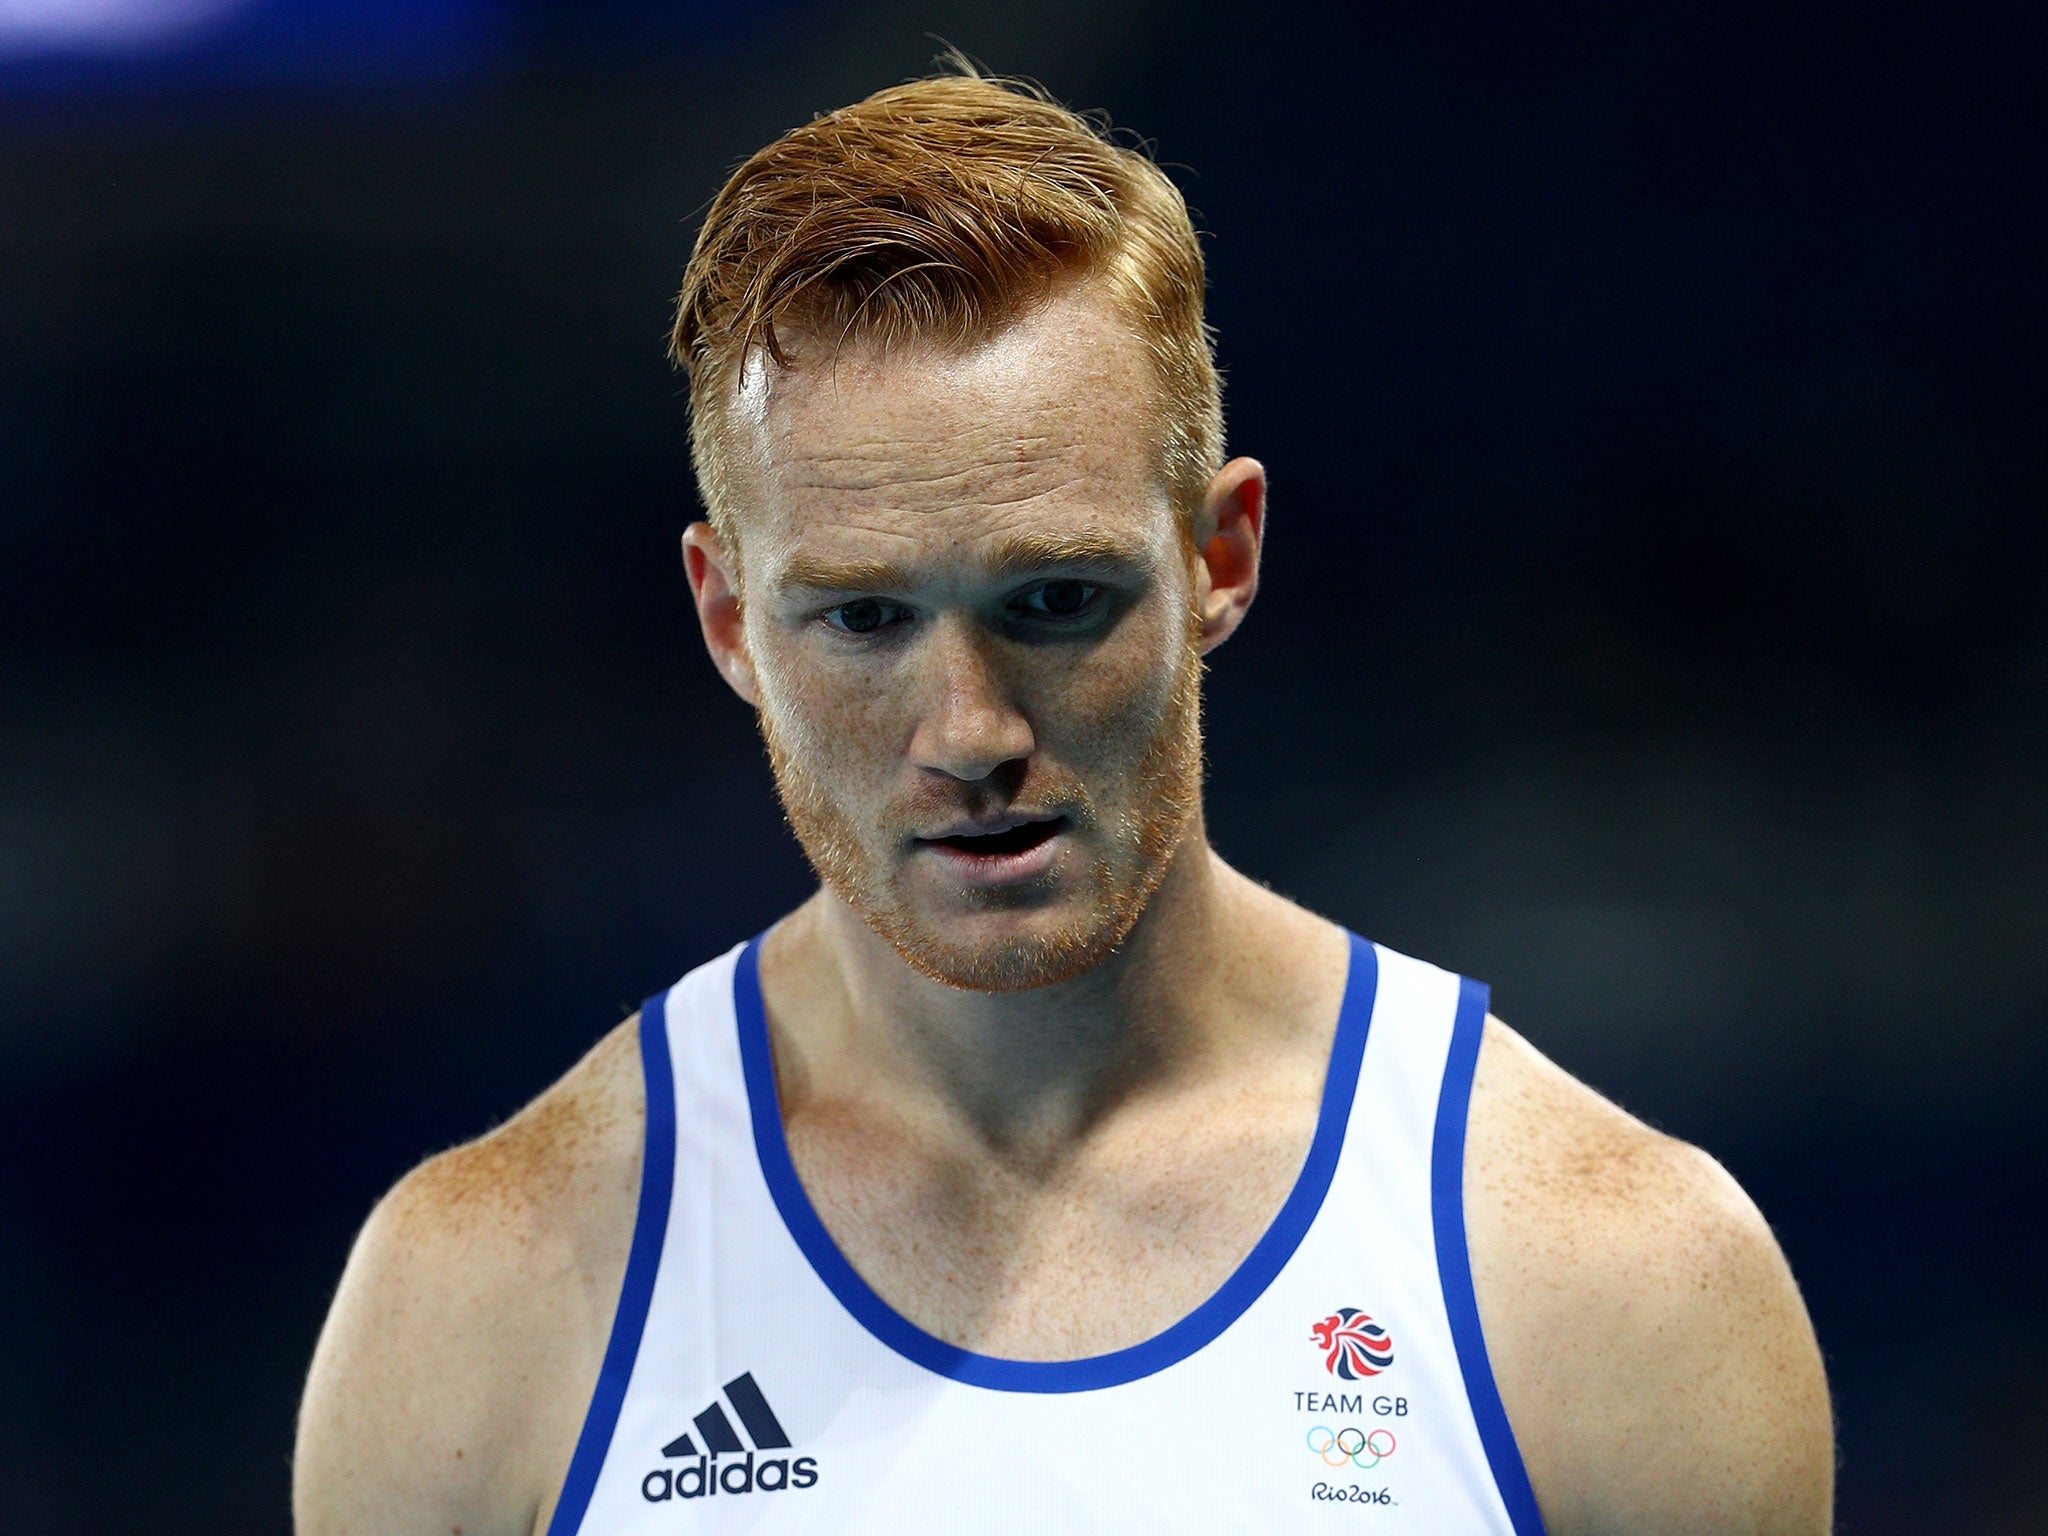 Greg Rutherford will miss the 2017 World Athletics Championships through injury